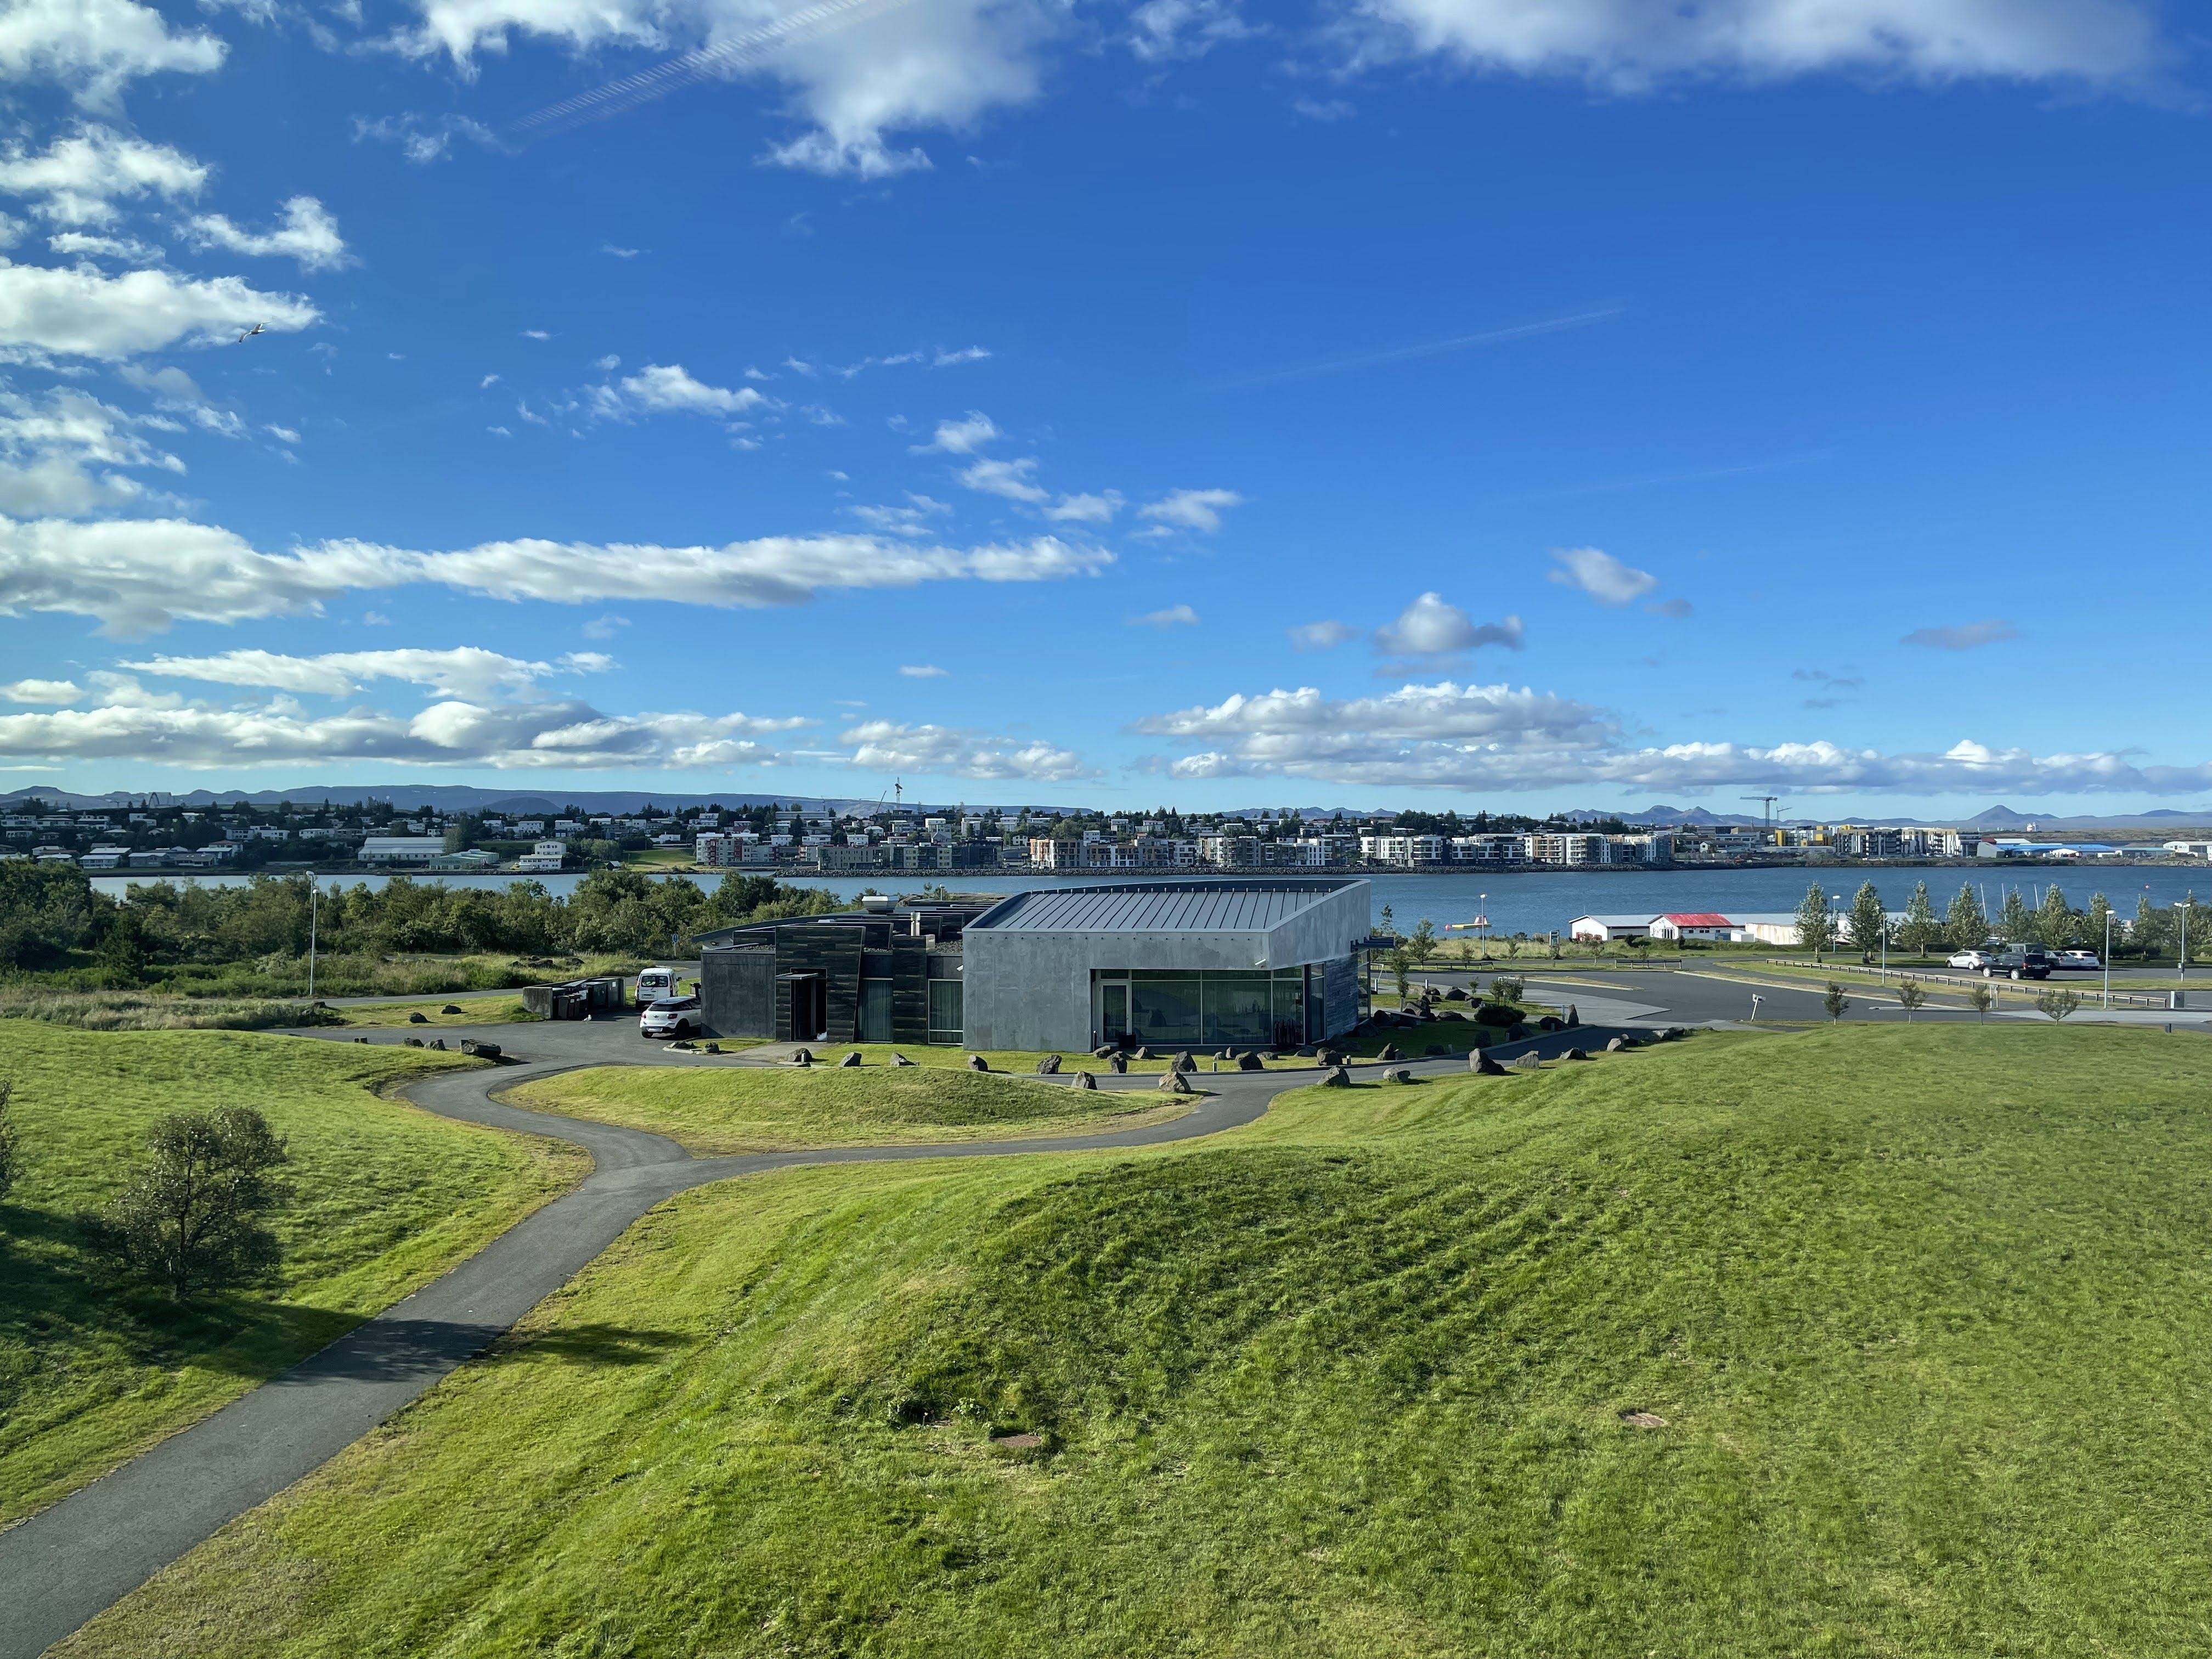 View from our classroom at Reykjavik University